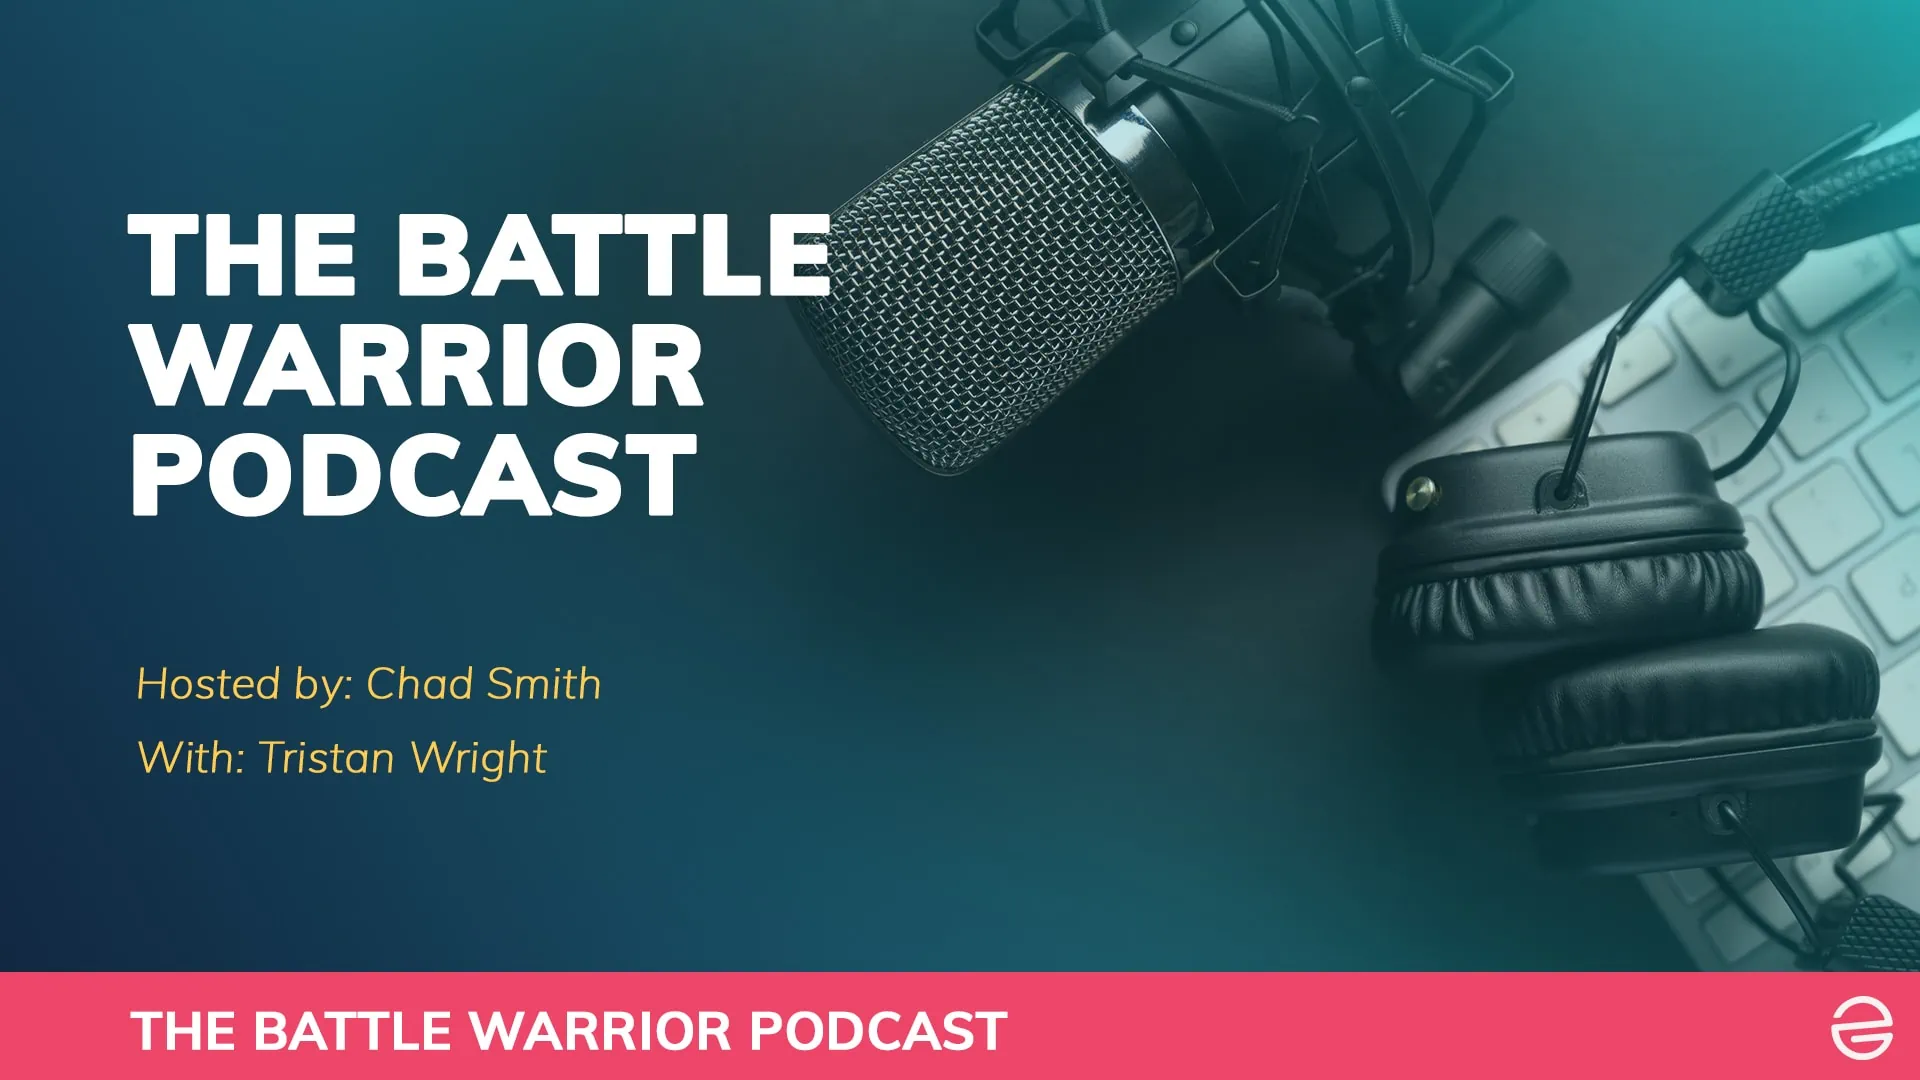 The Battle Warrior Podcast